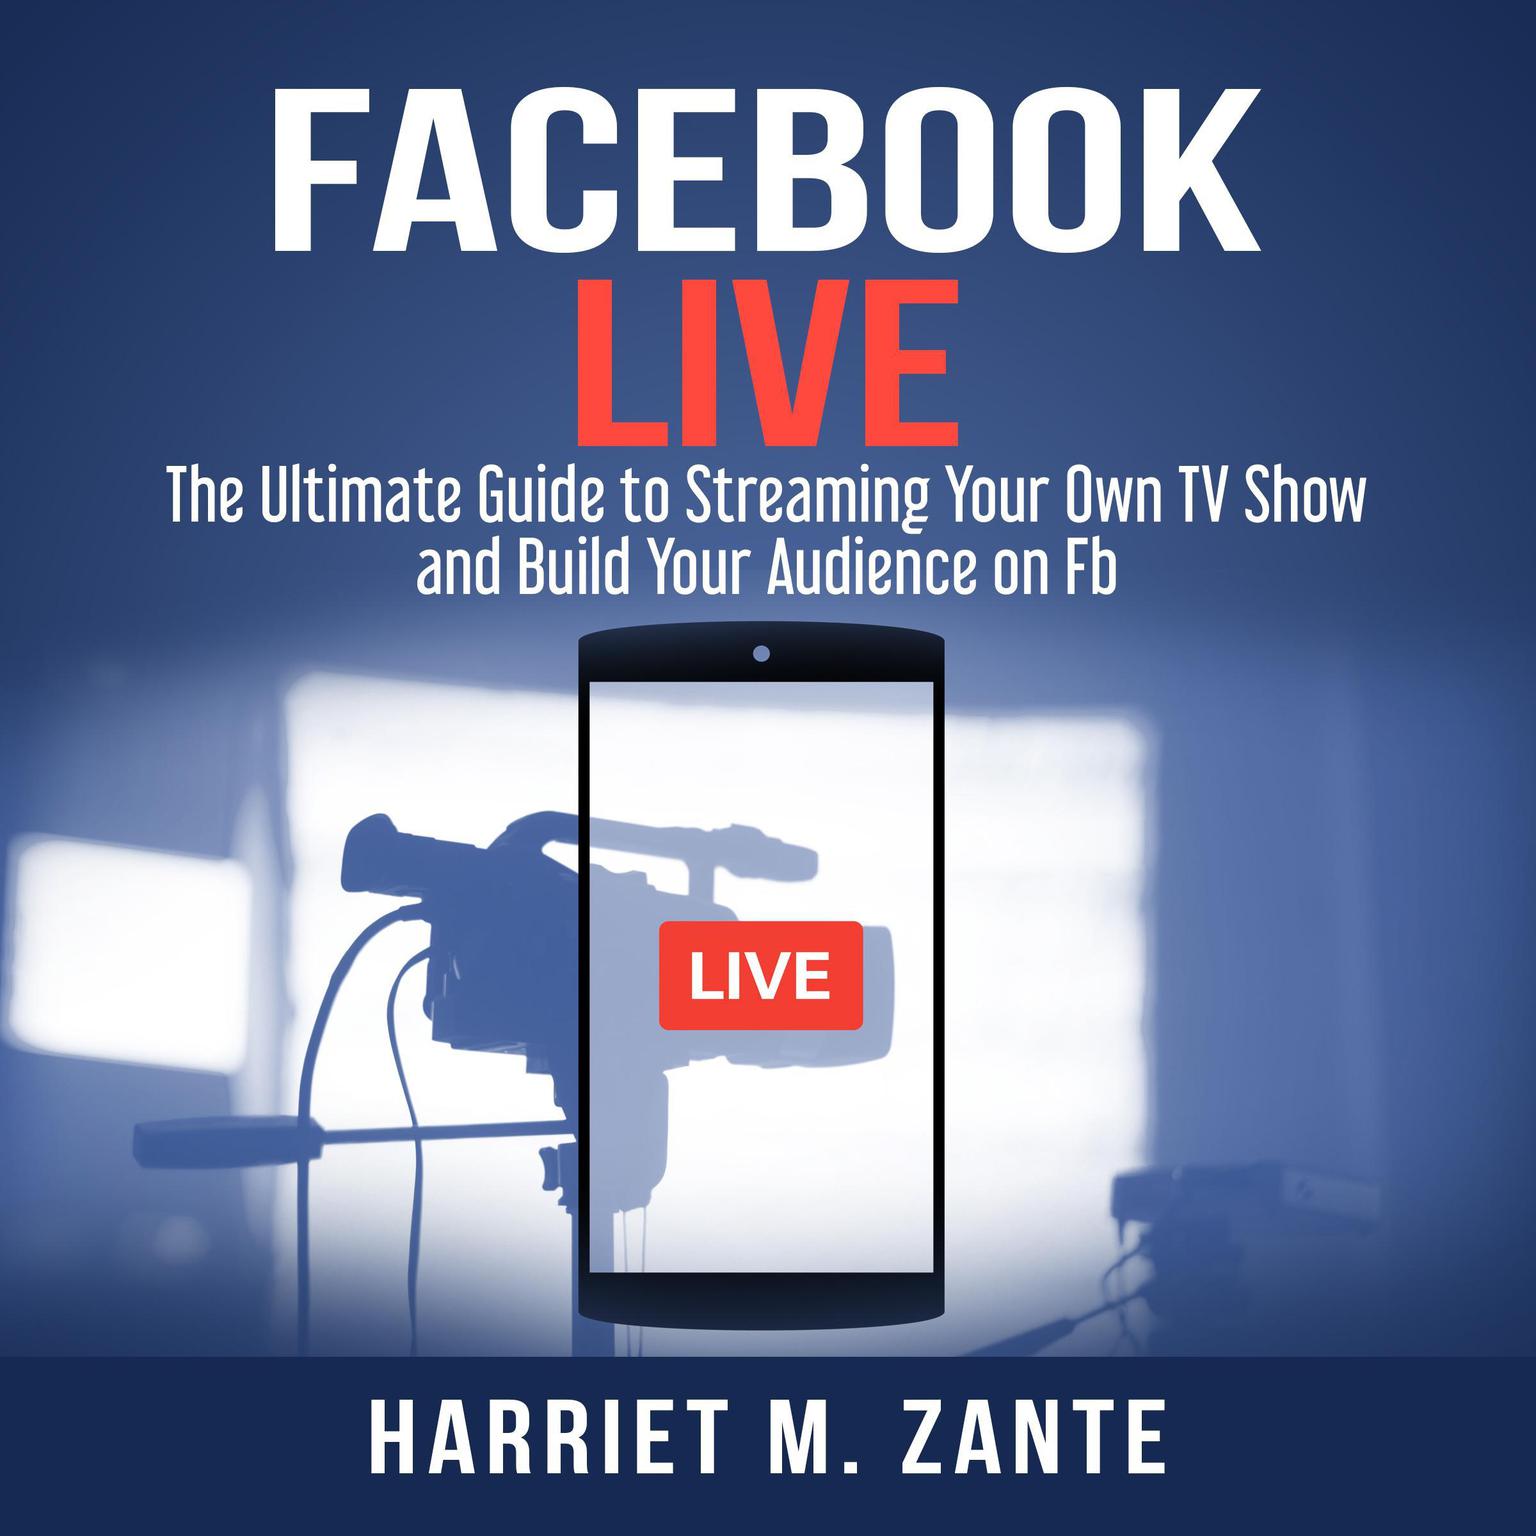 Facebook Live: The Ultimate Guide to Streaming Your Own TV Show and Build Your Audience on Fb Audiobook, by Harriet M. Zante